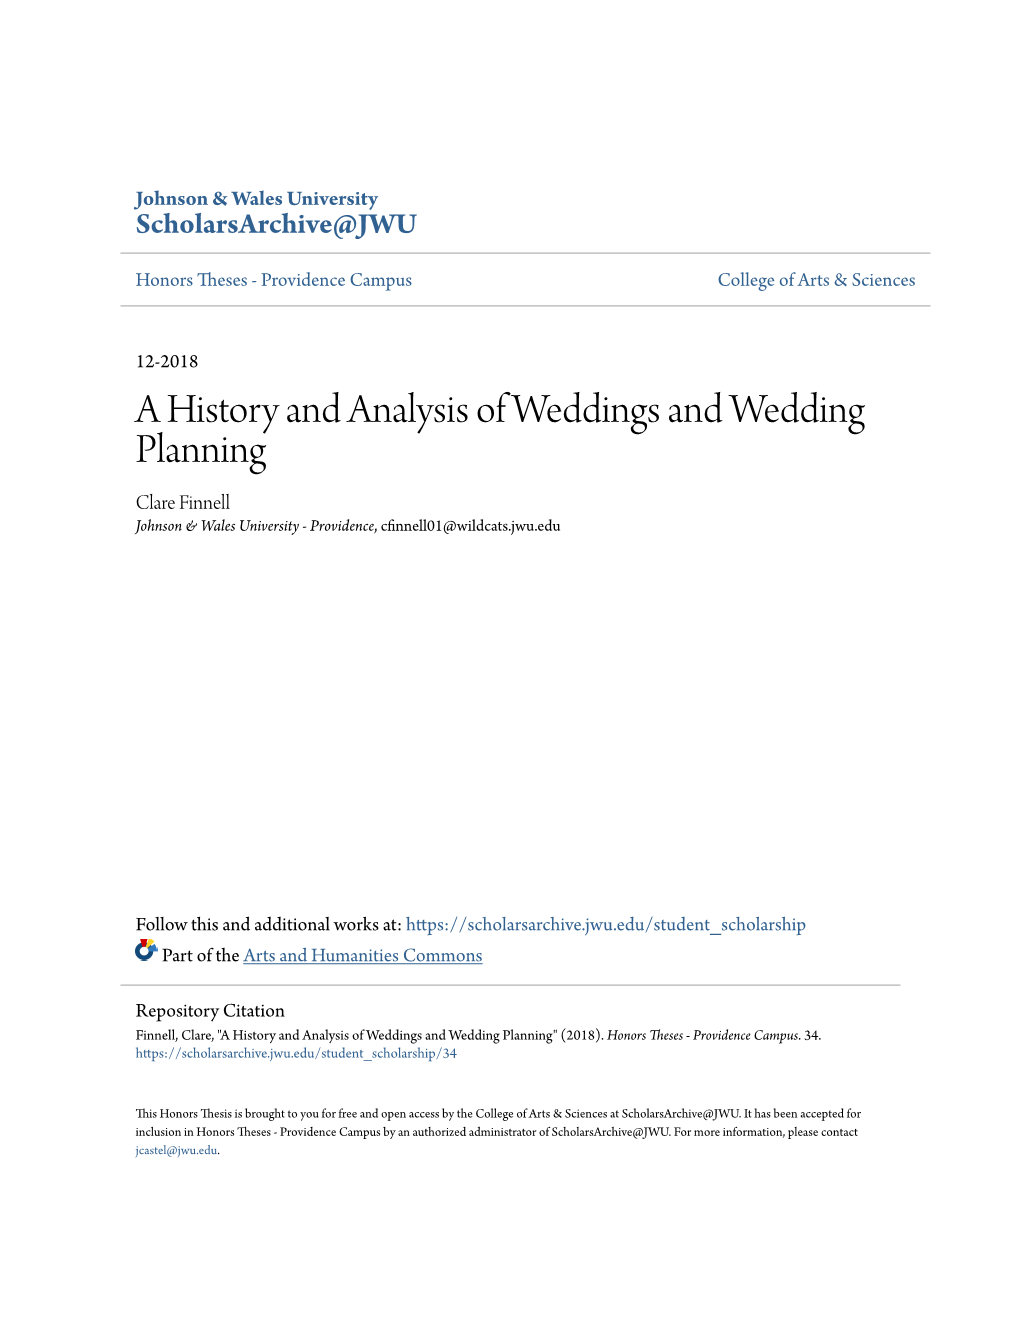 A History and Analysis of Weddings and Wedding Planning Clare Finnell Johnson & Wales University - Providence, Cfinnell01@Wildcats.Jwu.Edu